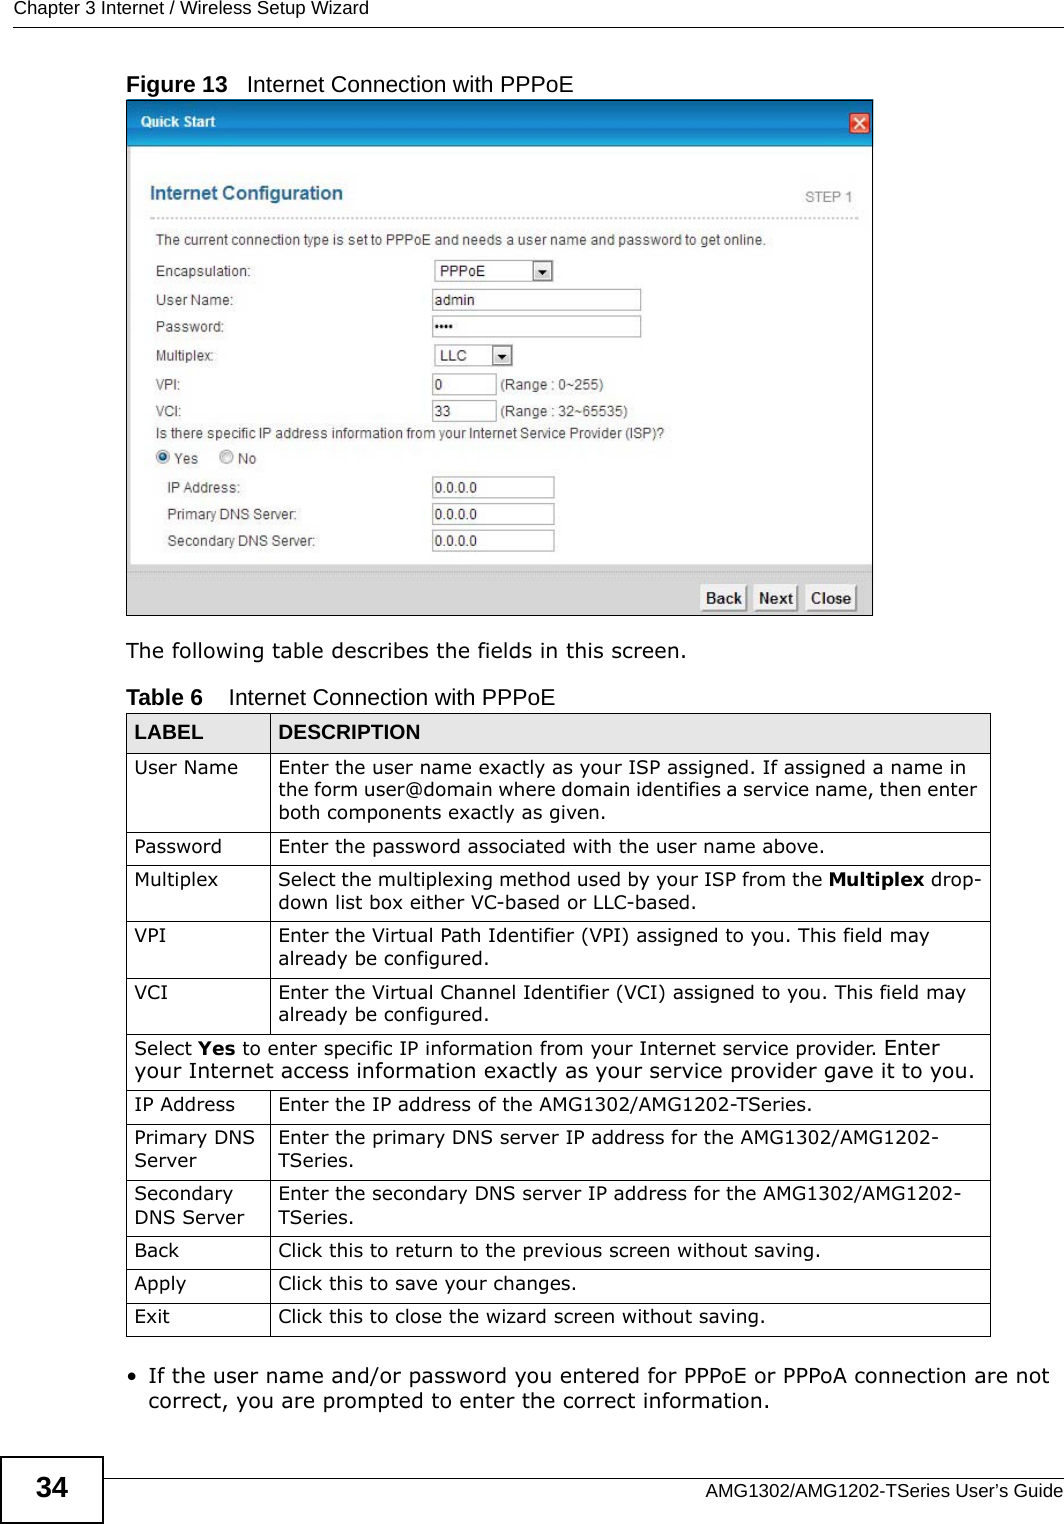 Chapter 3 Internet / Wireless Setup WizardAMG1302/AMG1202-TSeries User’s Guide34Figure 13   Internet Connection with PPPoEThe following table describes the fields in this screen.• If the user name and/or password you entered for PPPoE or PPPoA connection are not correct, you are prompted to enter the correct information.Table 6    Internet Connection with PPPoELABEL DESCRIPTIONUser Name Enter the user name exactly as your ISP assigned. If assigned a name in the form user@domain where domain identifies a service name, then enter both components exactly as given.Password Enter the password associated with the user name above.Multiplex Select the multiplexing method used by your ISP from the Multiplex drop-down list box either VC-based or LLC-based. VPI Enter the Virtual Path Identifier (VPI) assigned to you. This field may already be configured.VCI Enter the Virtual Channel Identifier (VCI) assigned to you. This field may already be configured.Select Yes to enter specific IP information from your Internet service provider. Enter your Internet access information exactly as your service provider gave it to you. IP Address Enter the IP address of the AMG1302/AMG1202-TSeries. Primary DNS ServerEnter the primary DNS server IP address for the AMG1302/AMG1202-TSeries.Secondary DNS ServerEnter the secondary DNS server IP address for the AMG1302/AMG1202-TSeries.Back Click this to return to the previous screen without saving.Apply Click this to save your changes. Exit Click this to close the wizard screen without saving.